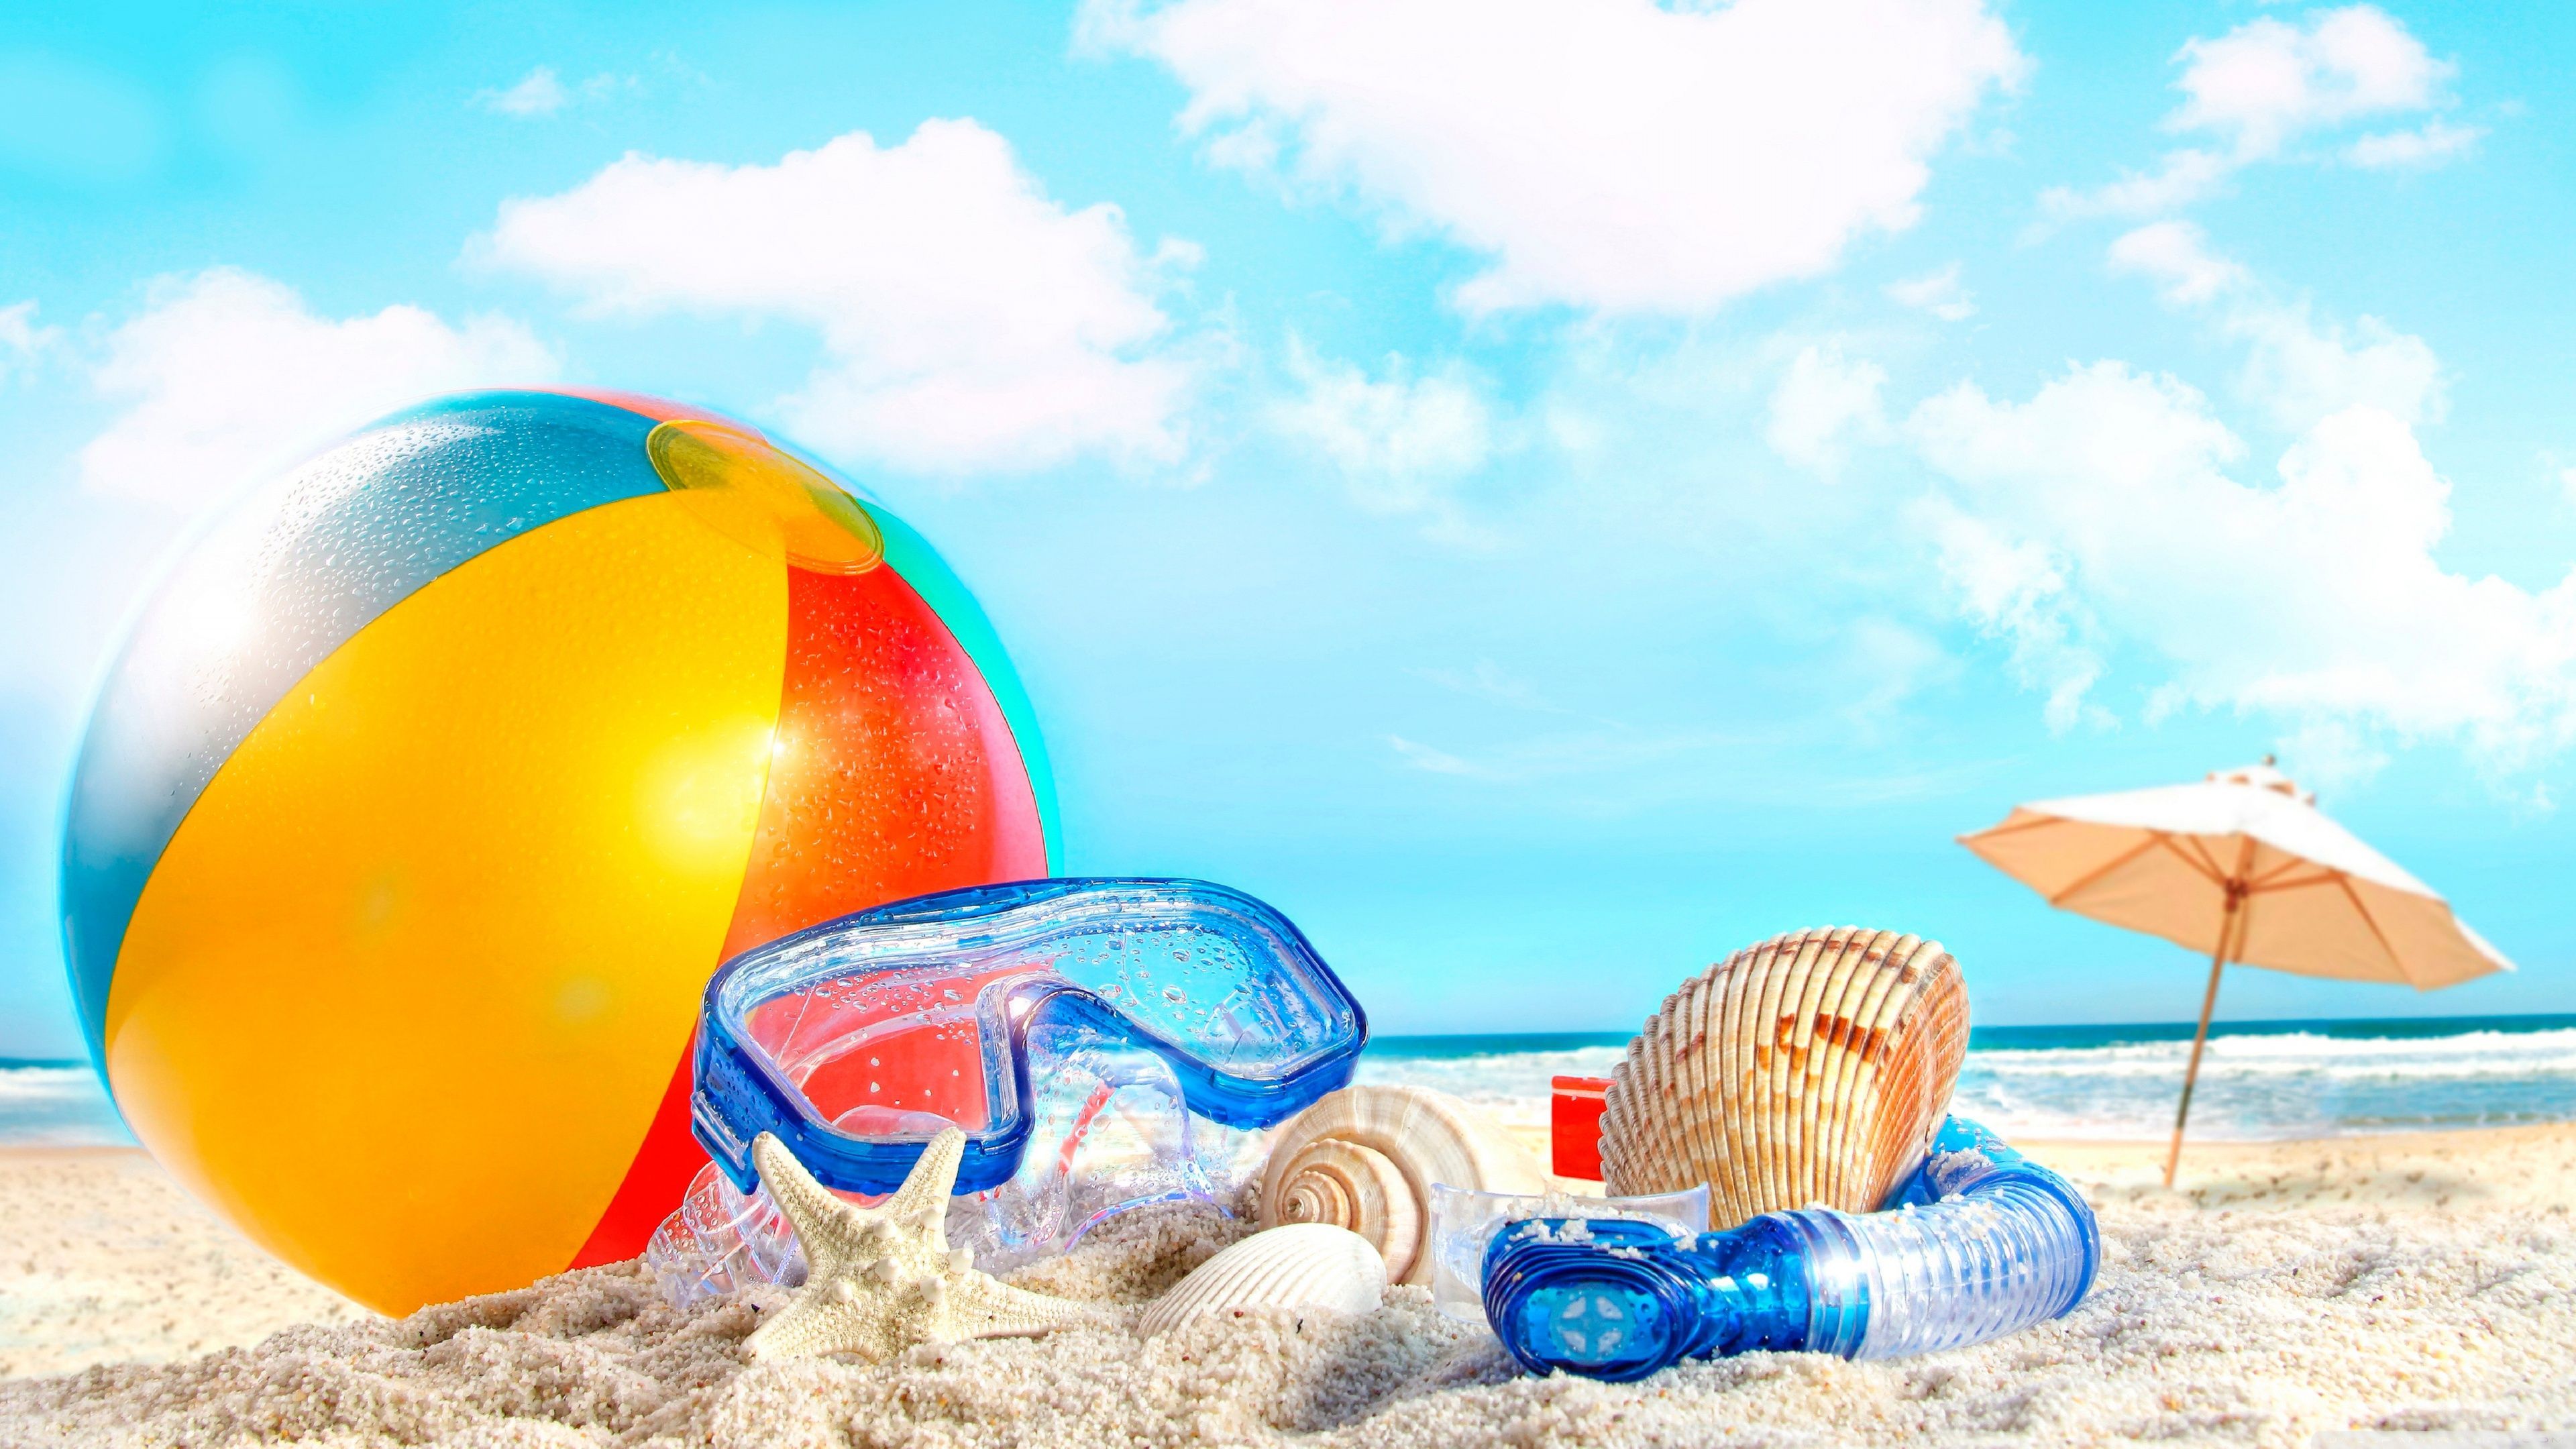 Summer Holiday Wallpapers for Desktop | The Art Mad Wallpapers